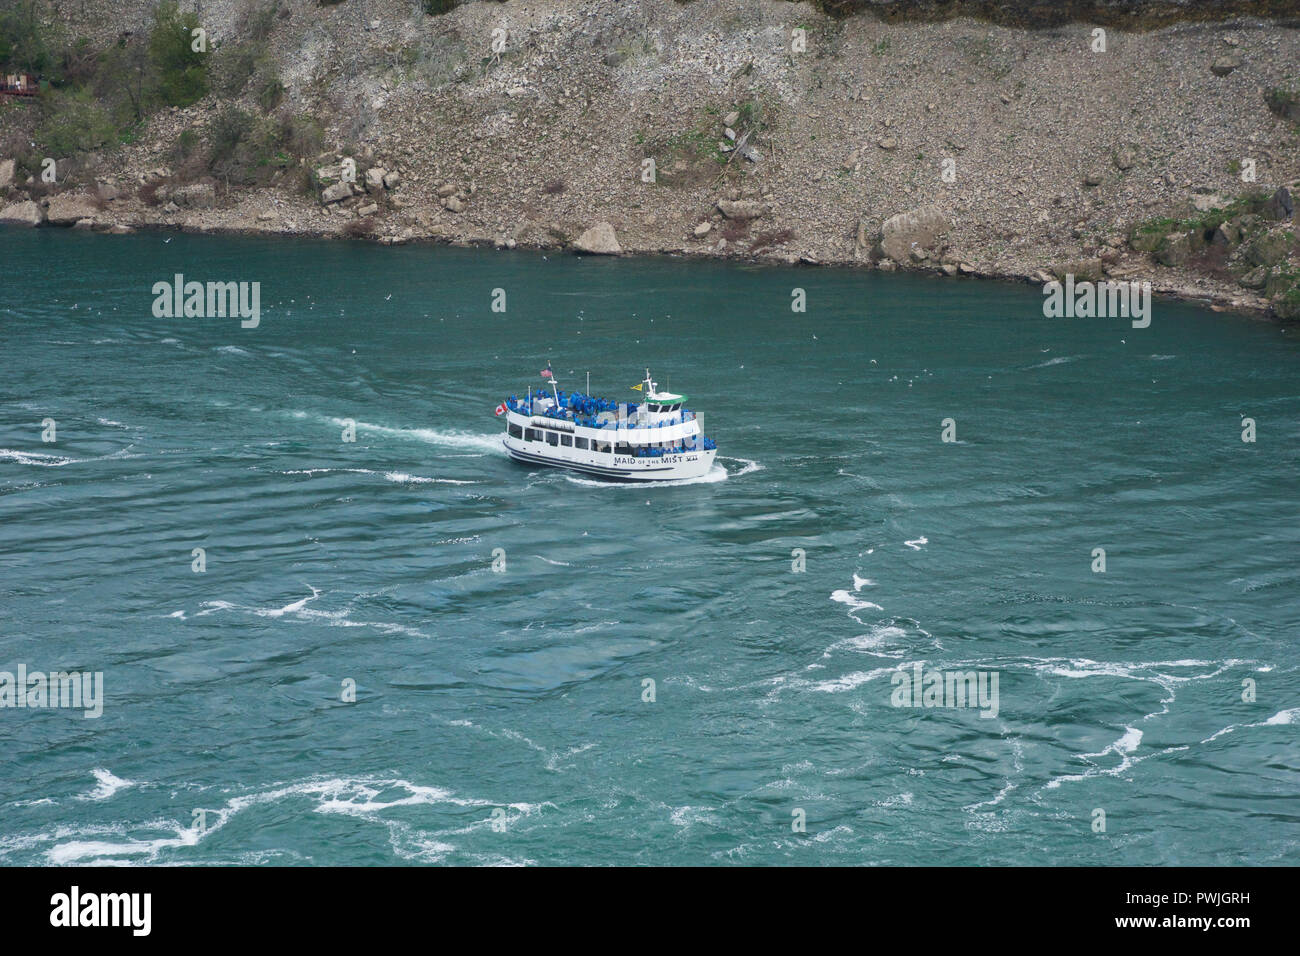 NIAGARA FALLS, ONTARIO, CANADA - MAY 21st 2018: The Maid of the Mist cruise ferry transports tourists through the mist on the wild waters at Niagara Falls Stock Photo